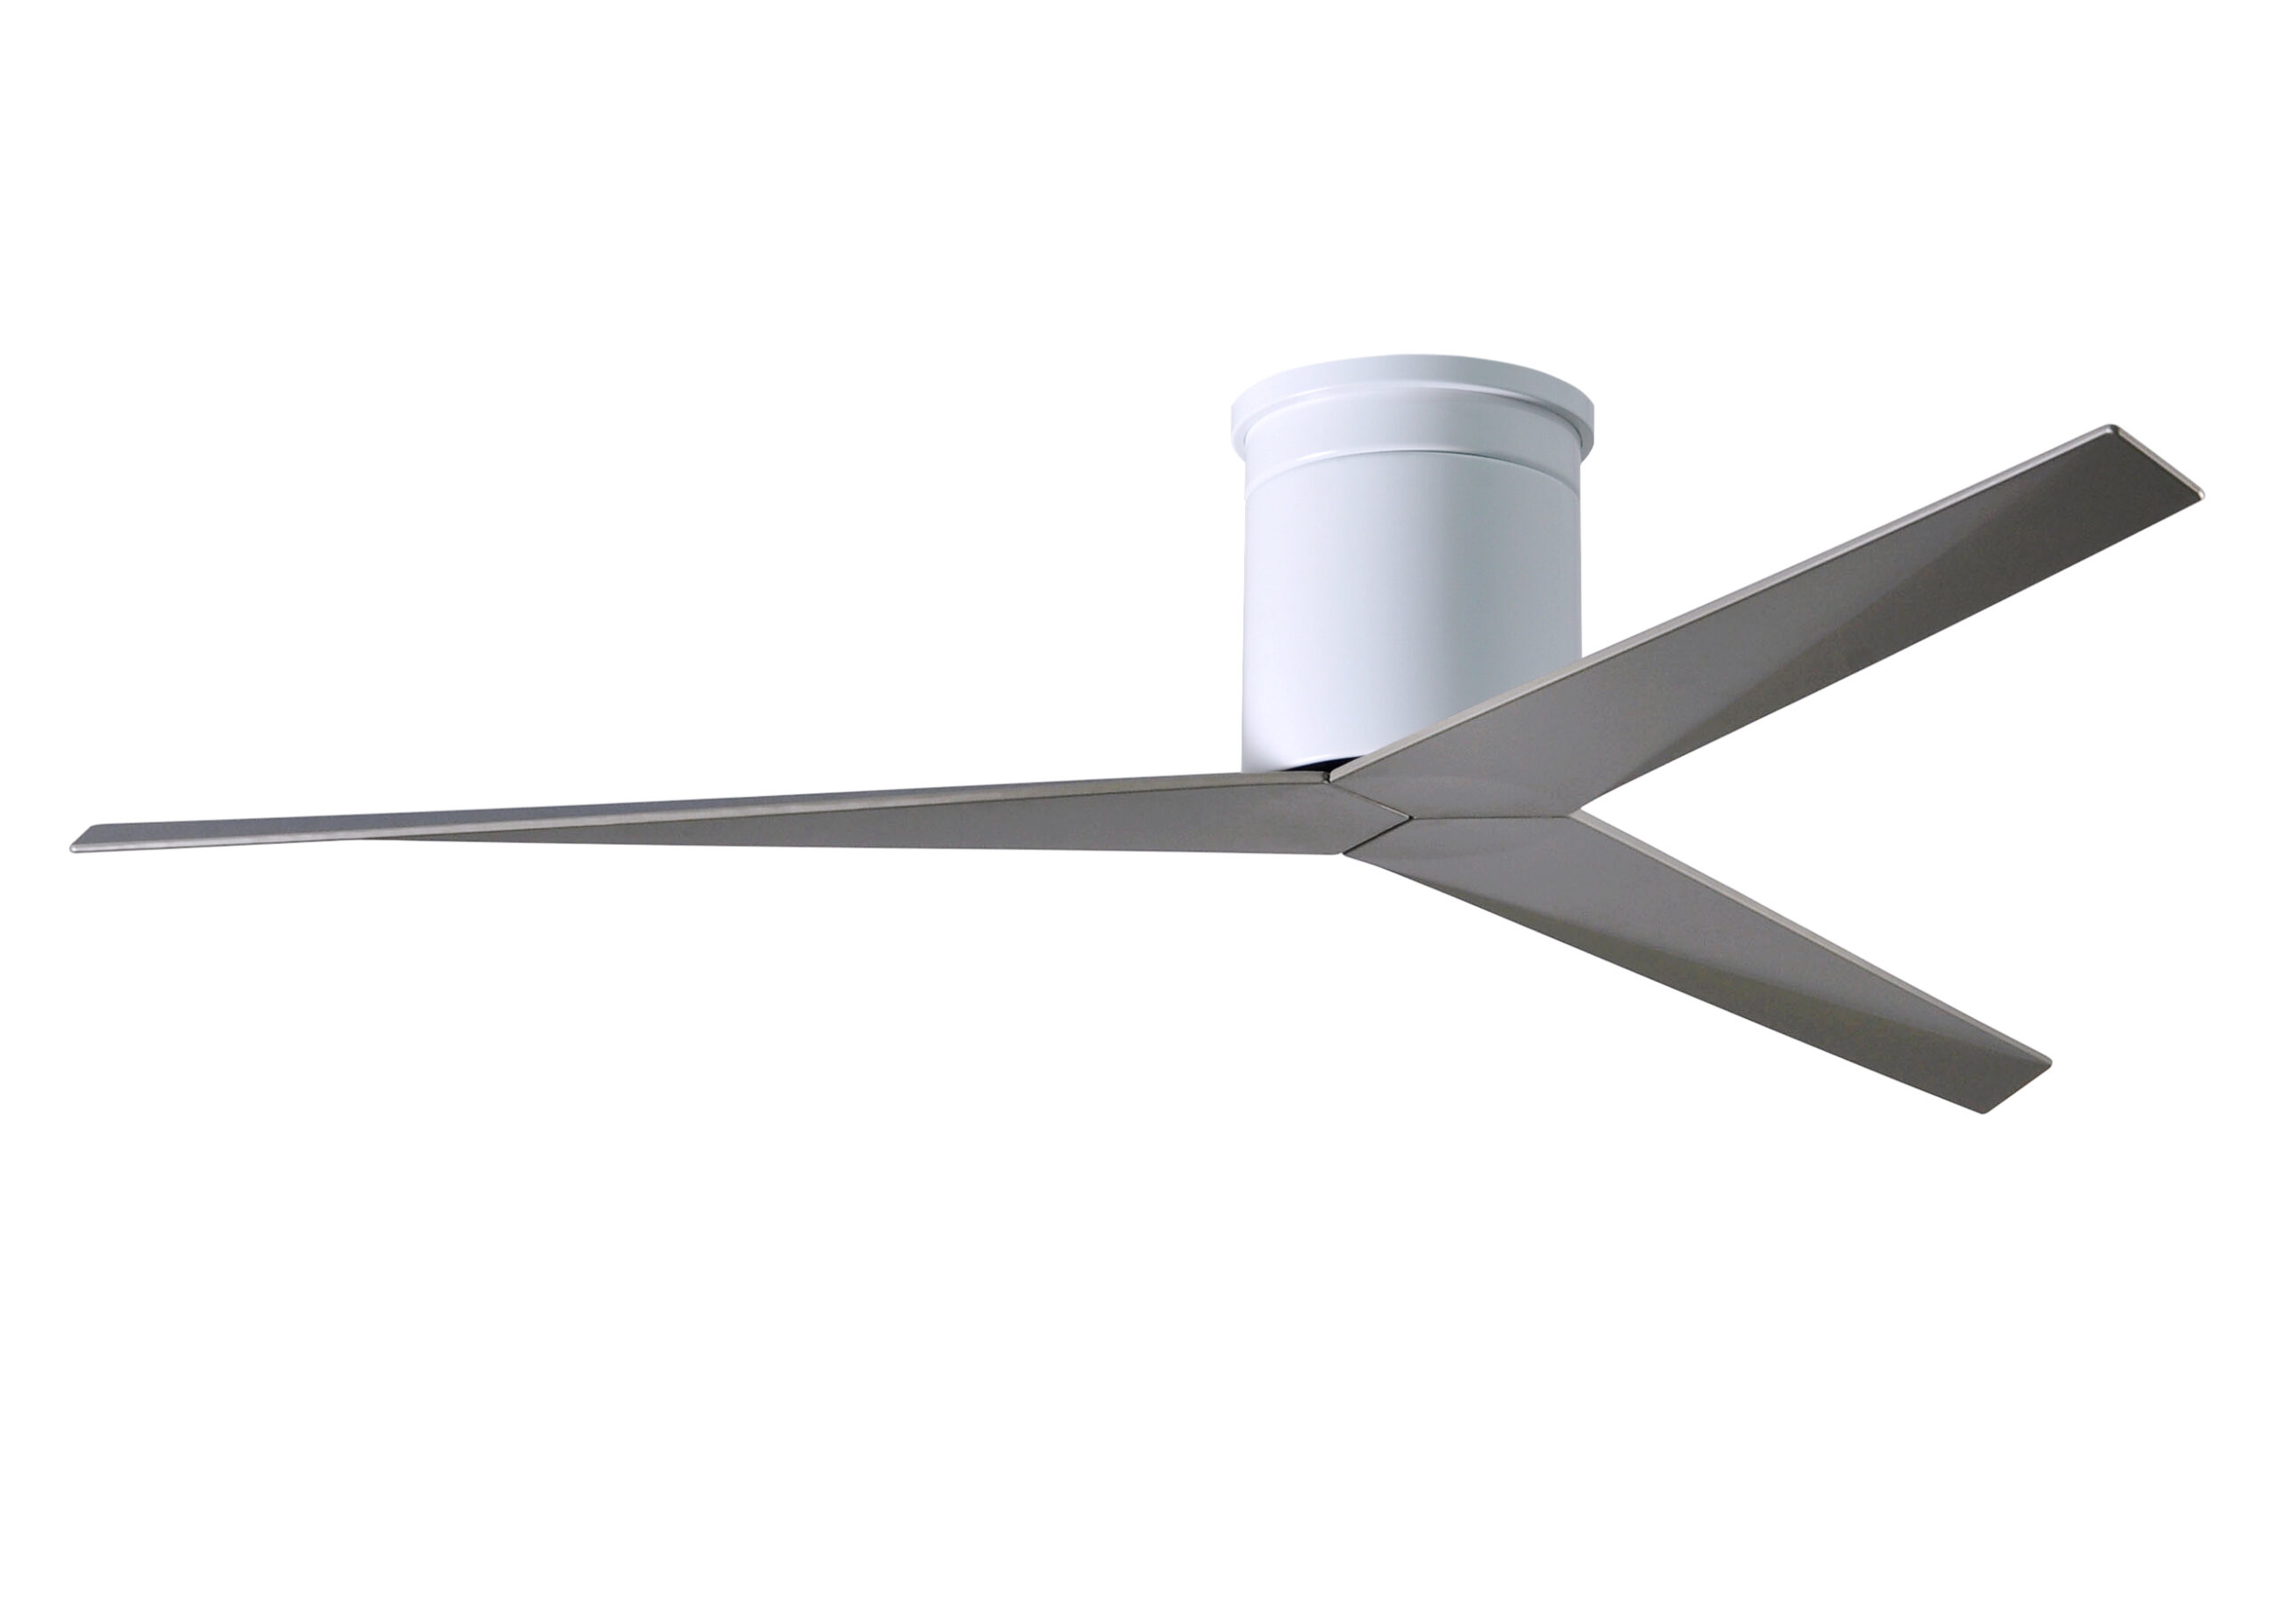 Eliza-H Ceiling Fan in Gloss White with Brushed Nickel Blades